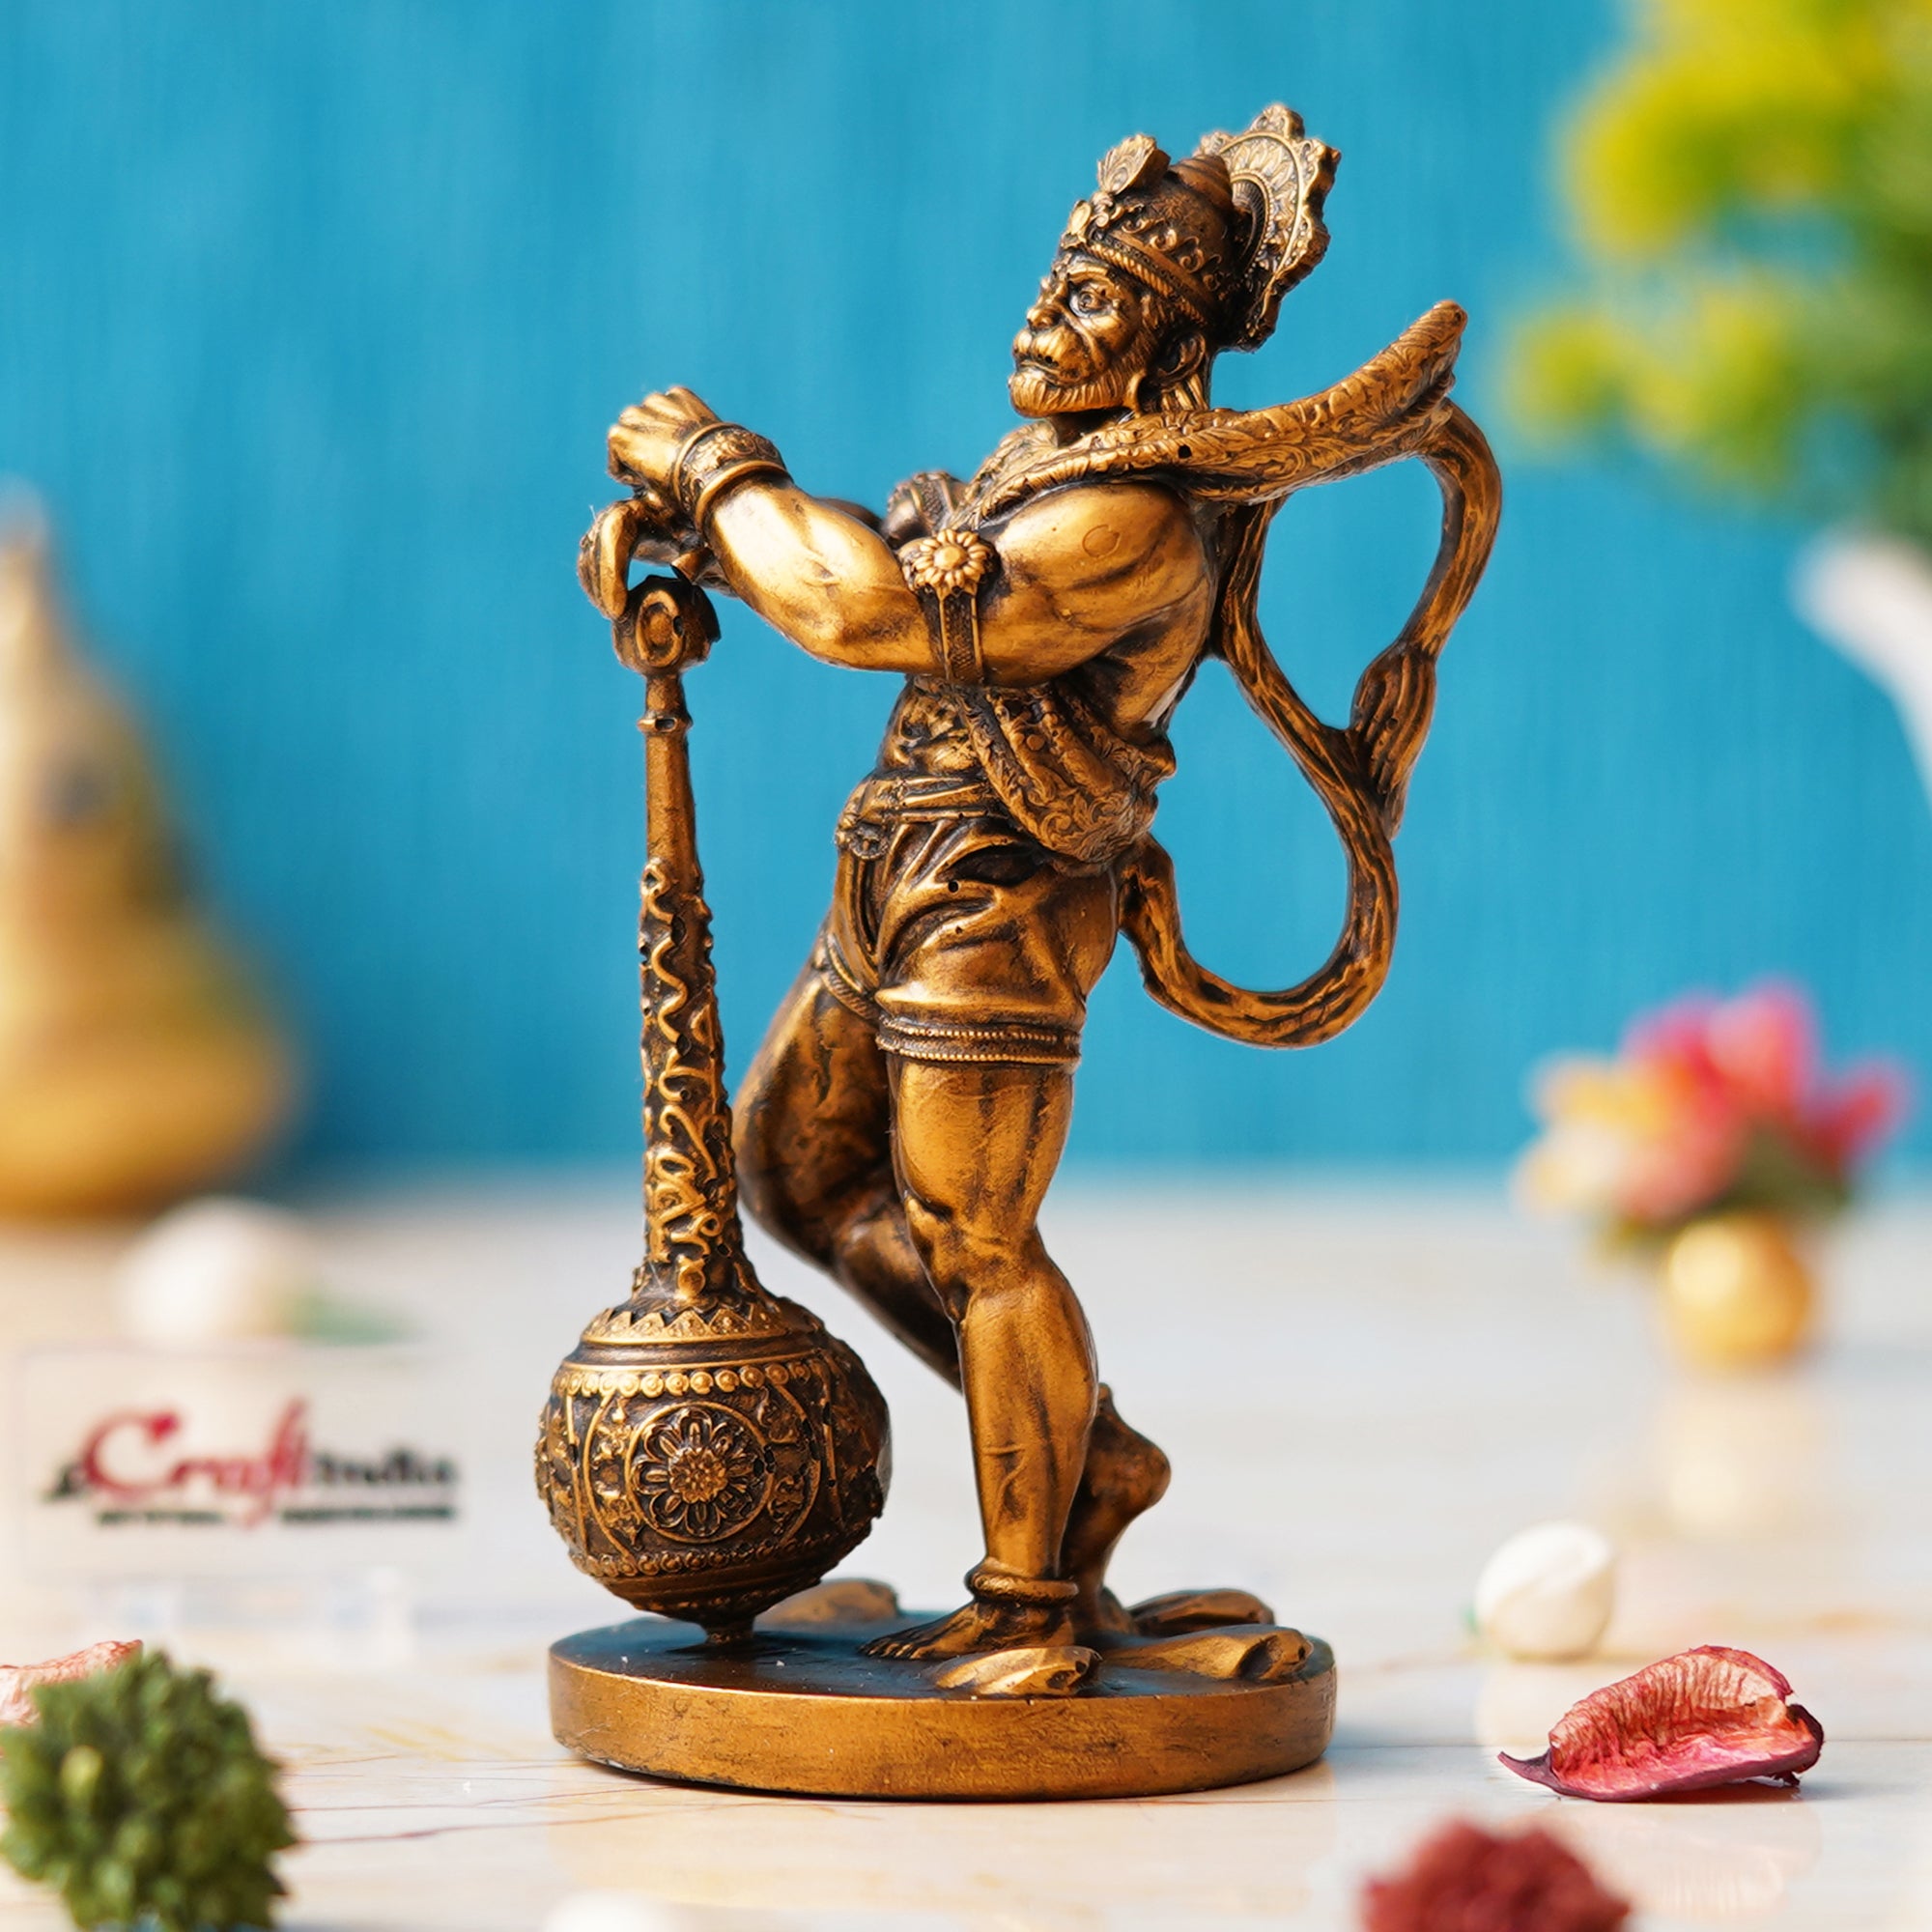 Golden Polyresin Handcrafted Standing Lord Hanuman Idol with Gada/Mace 4